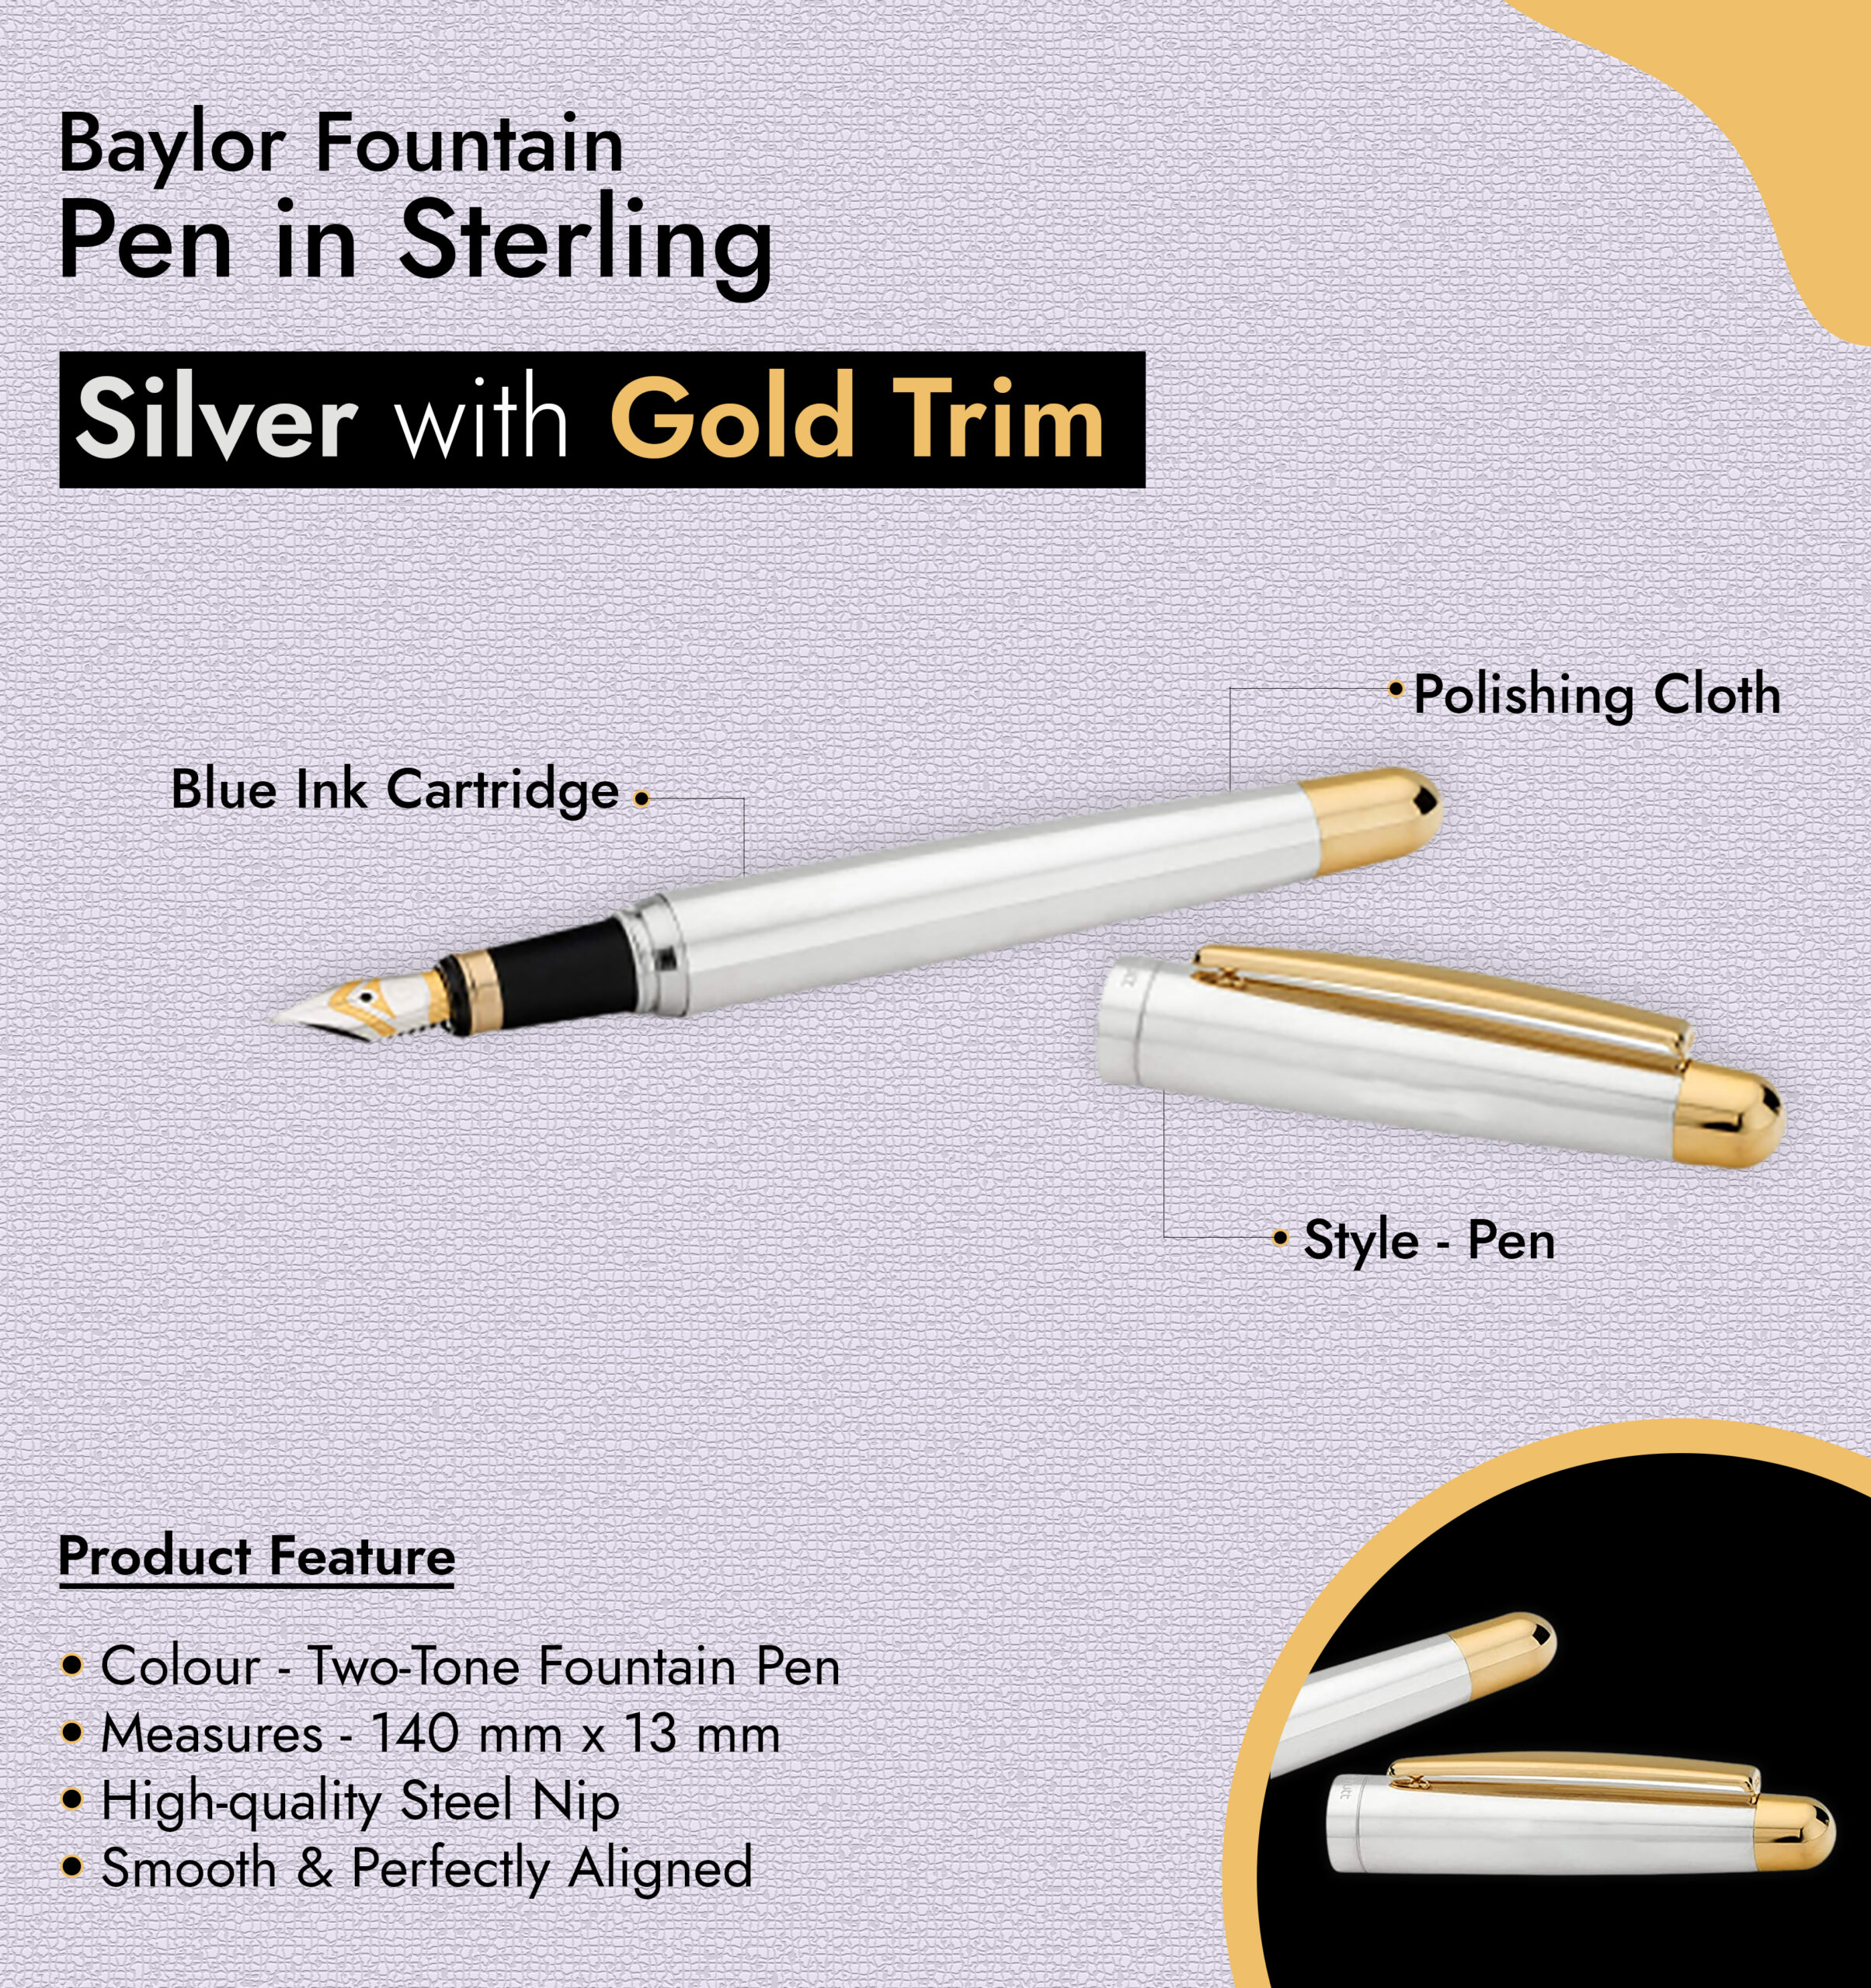 Baylor Fountain Pen in Sterling Silver with Gold Trim infographic